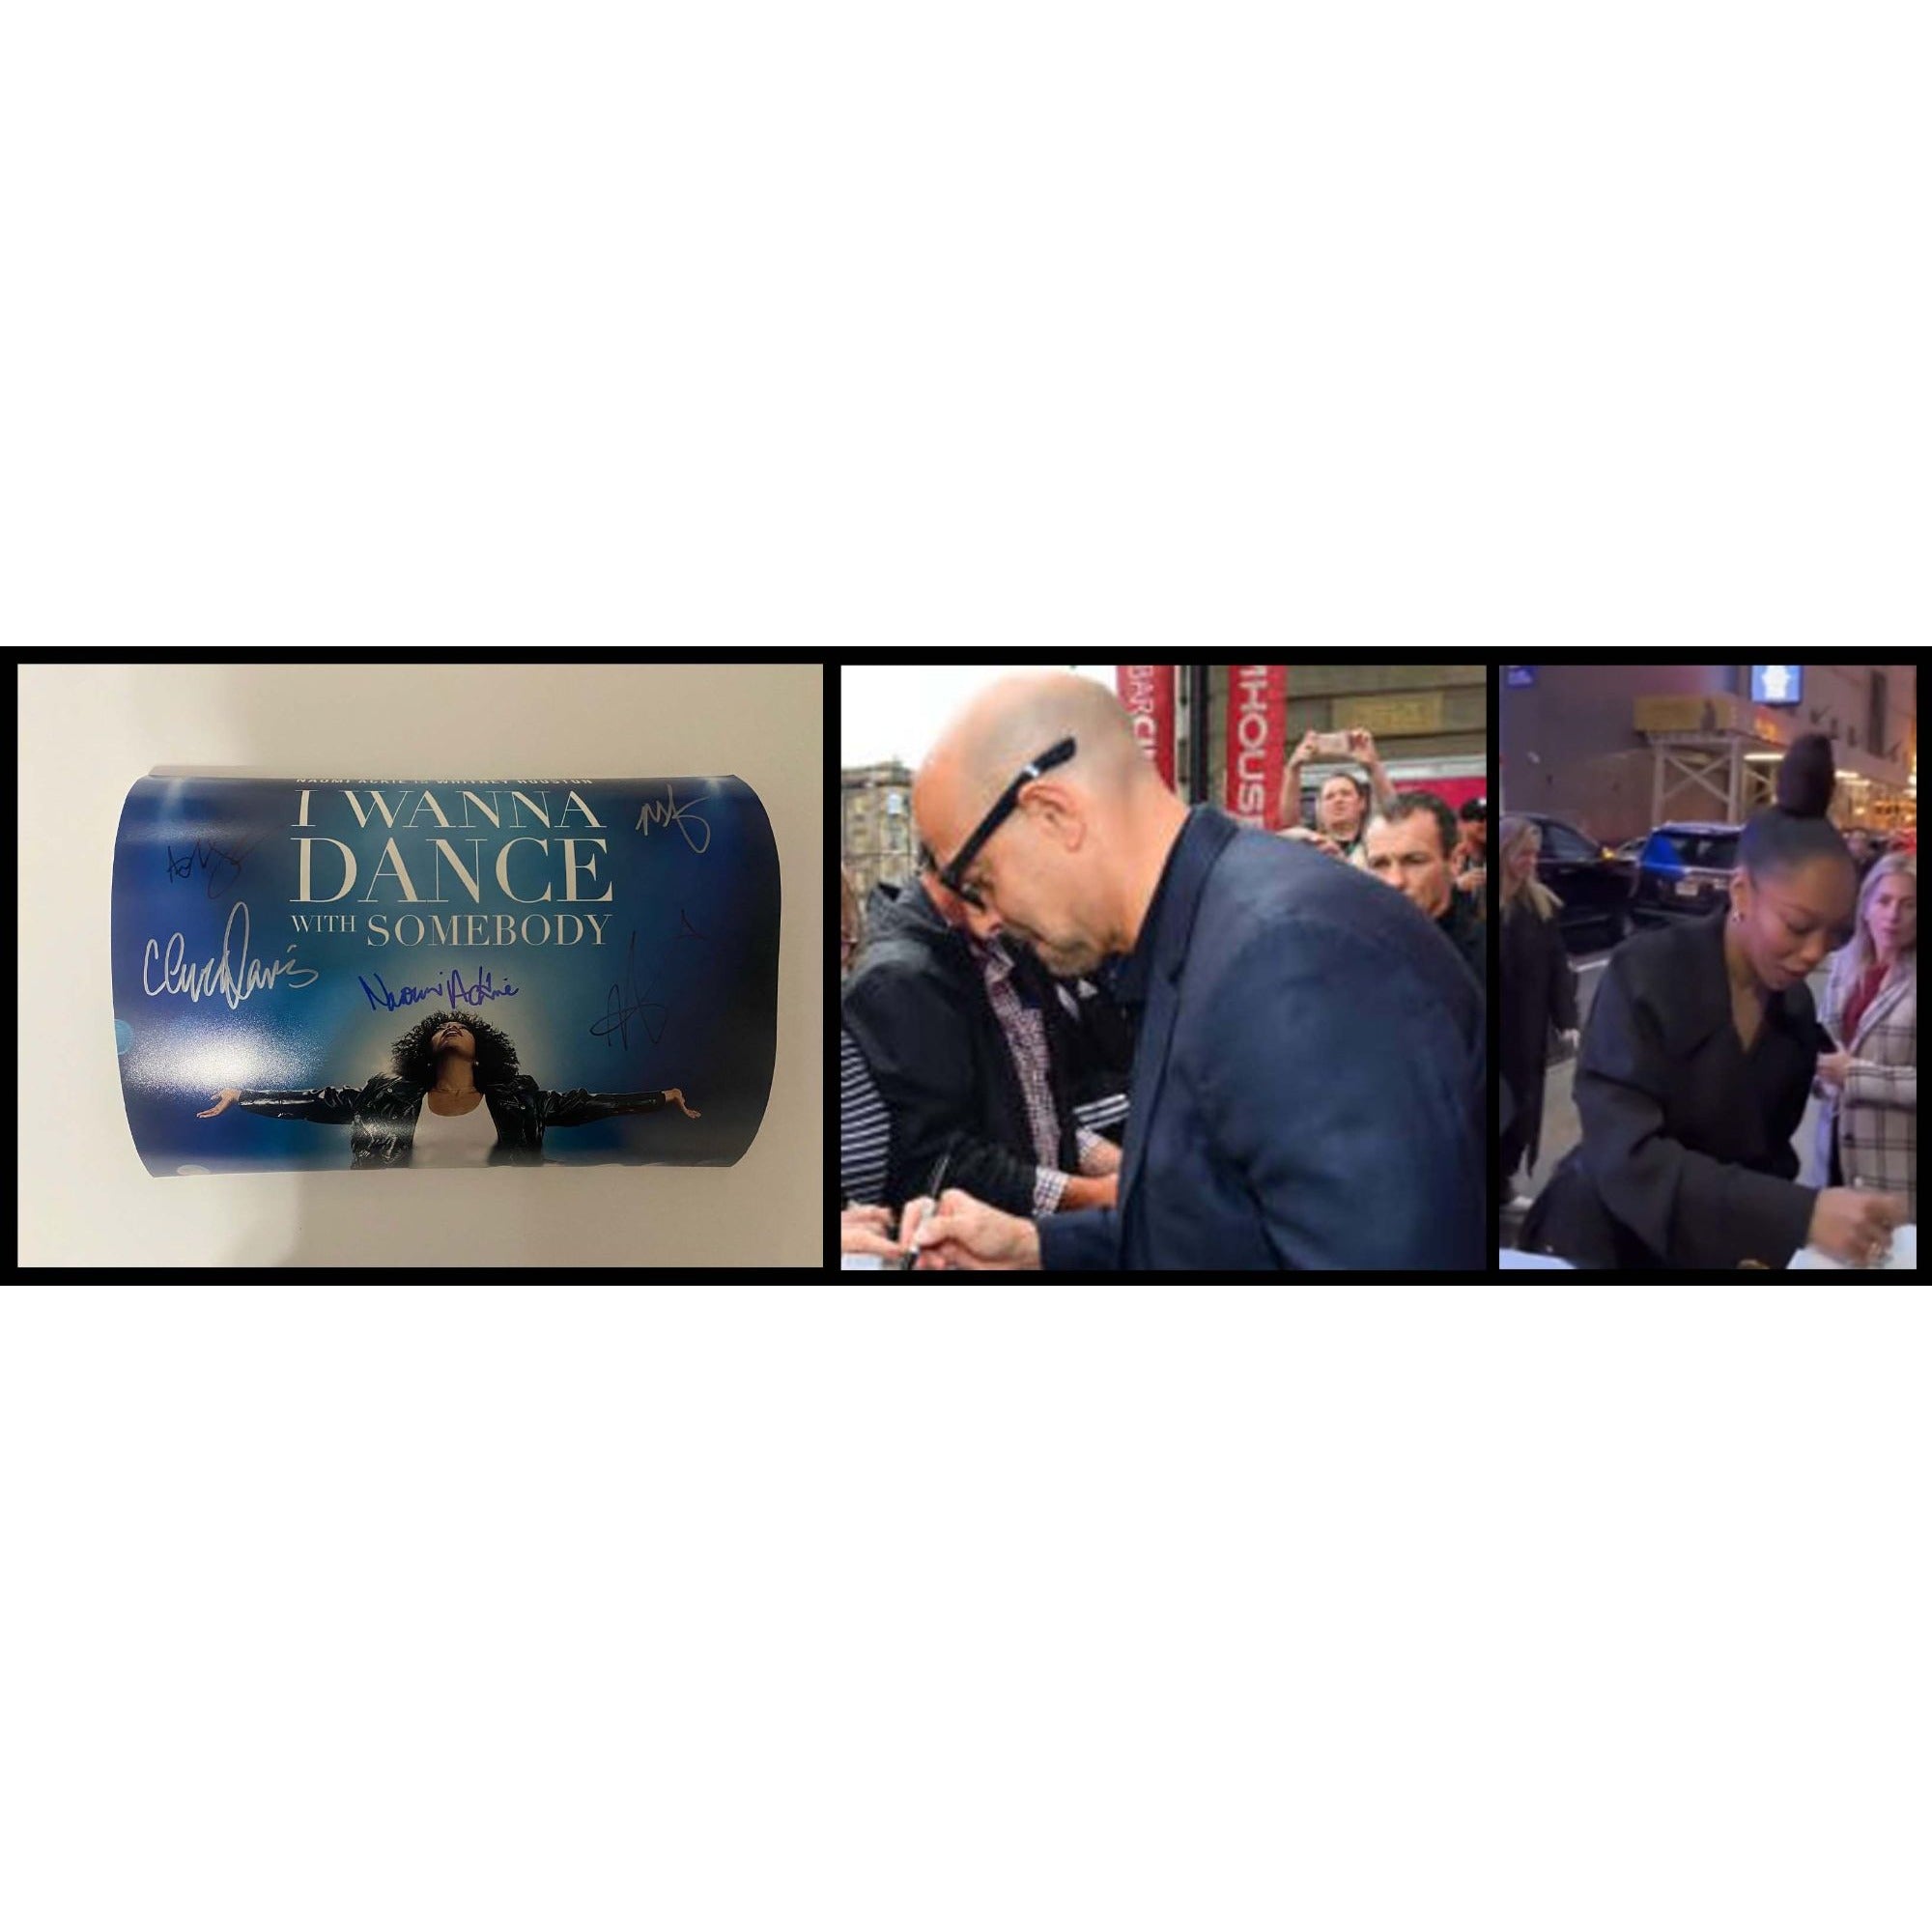 I Wanna Dance  Naomi Ackie Clive Davis Stanley Tucci 11x14 photo signed with proof